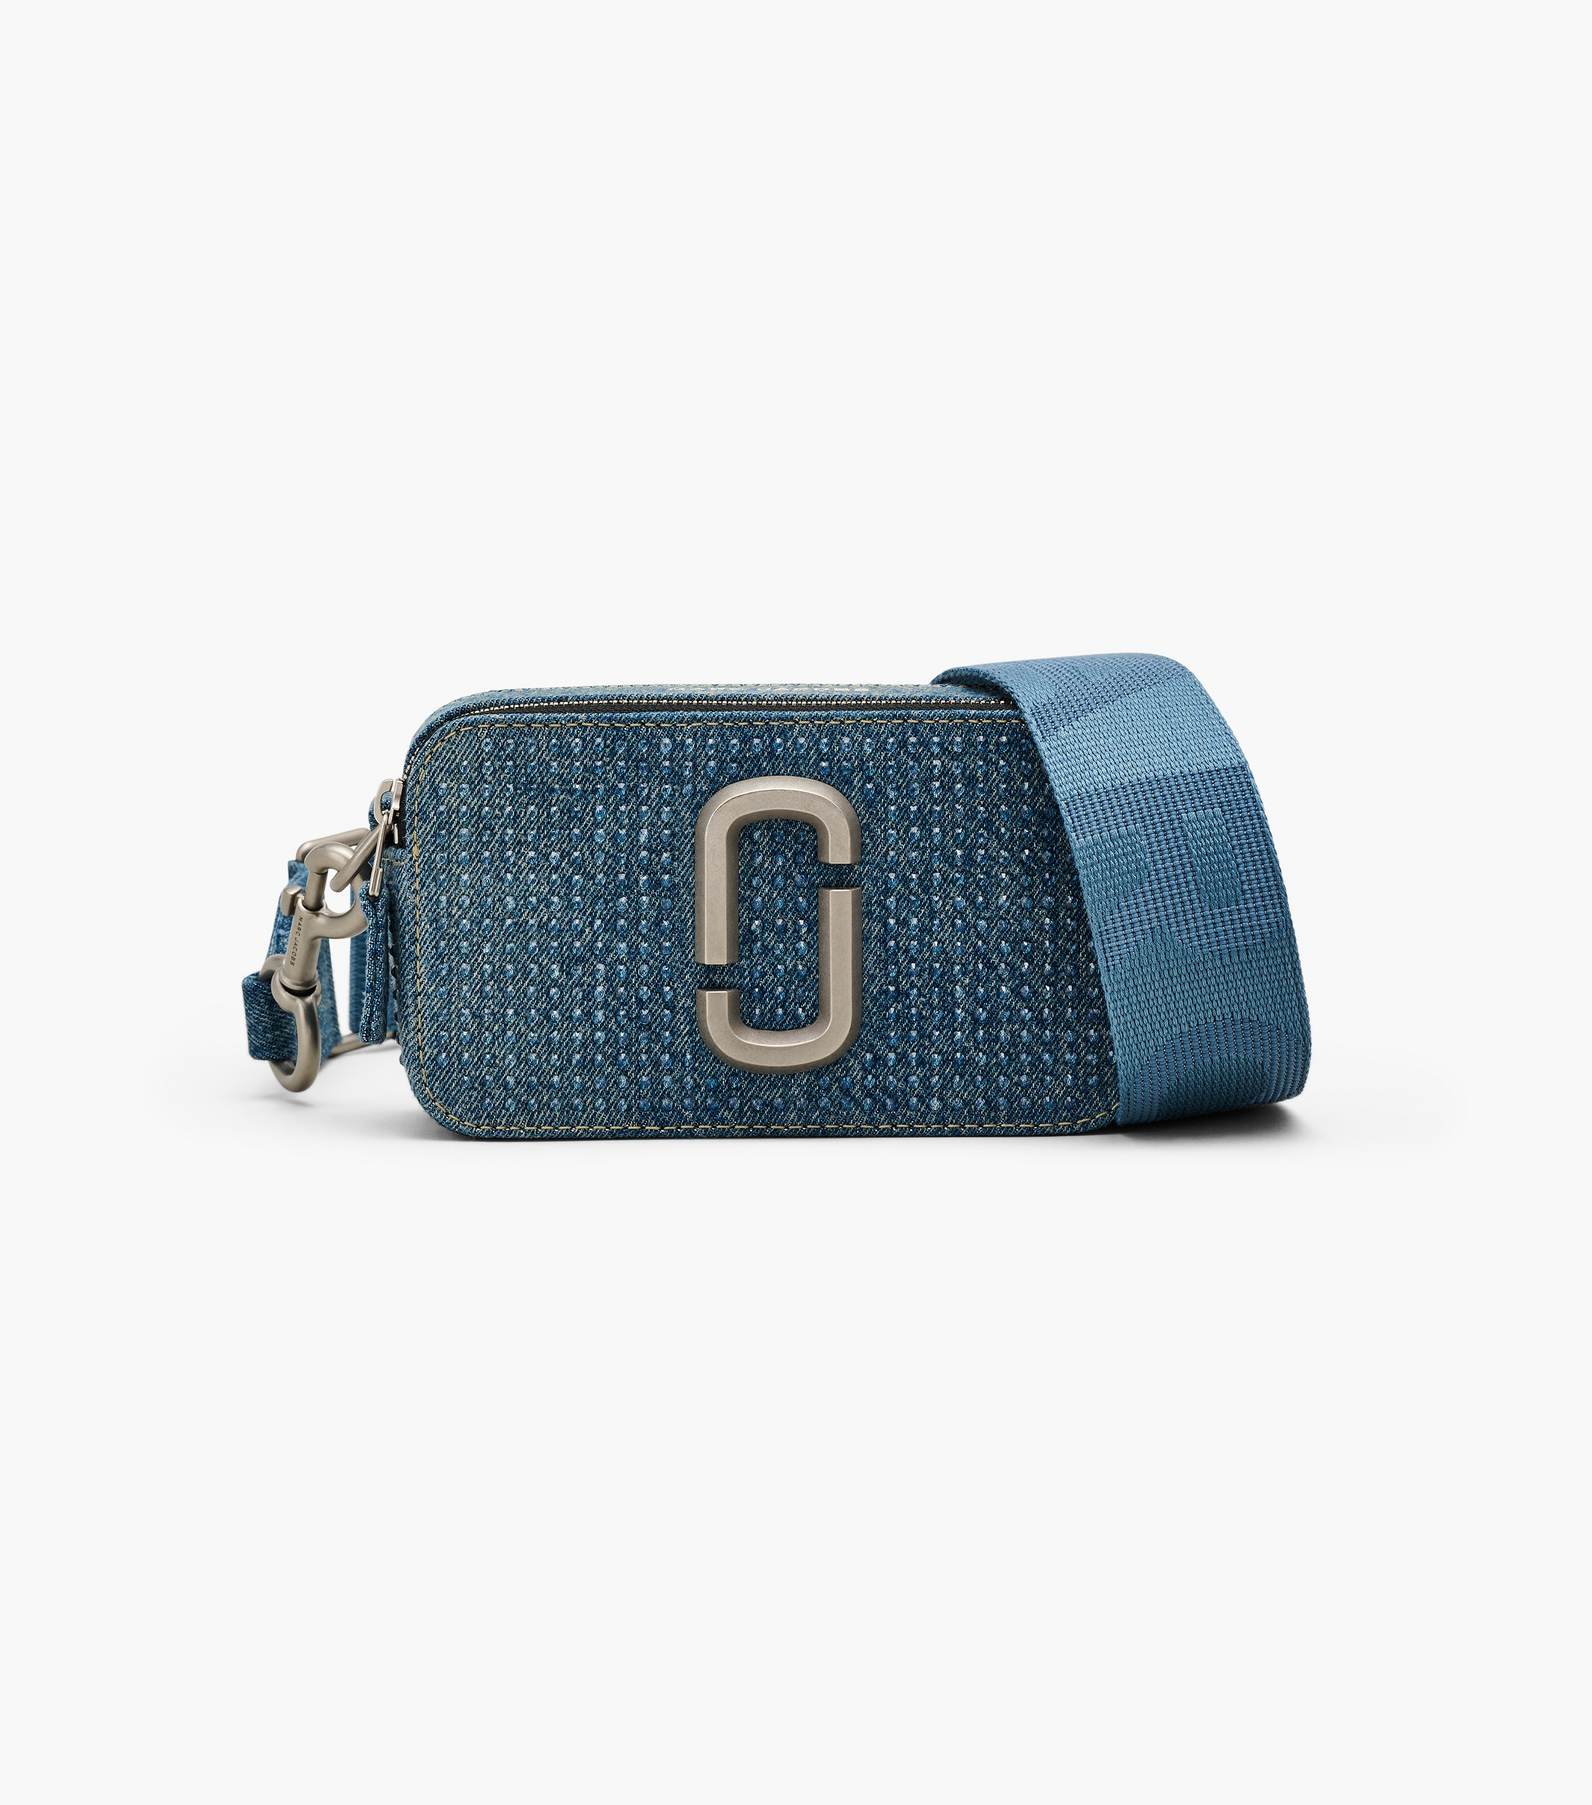 The Crystal Denim Snapshot | Marc Jacobs | Official Site